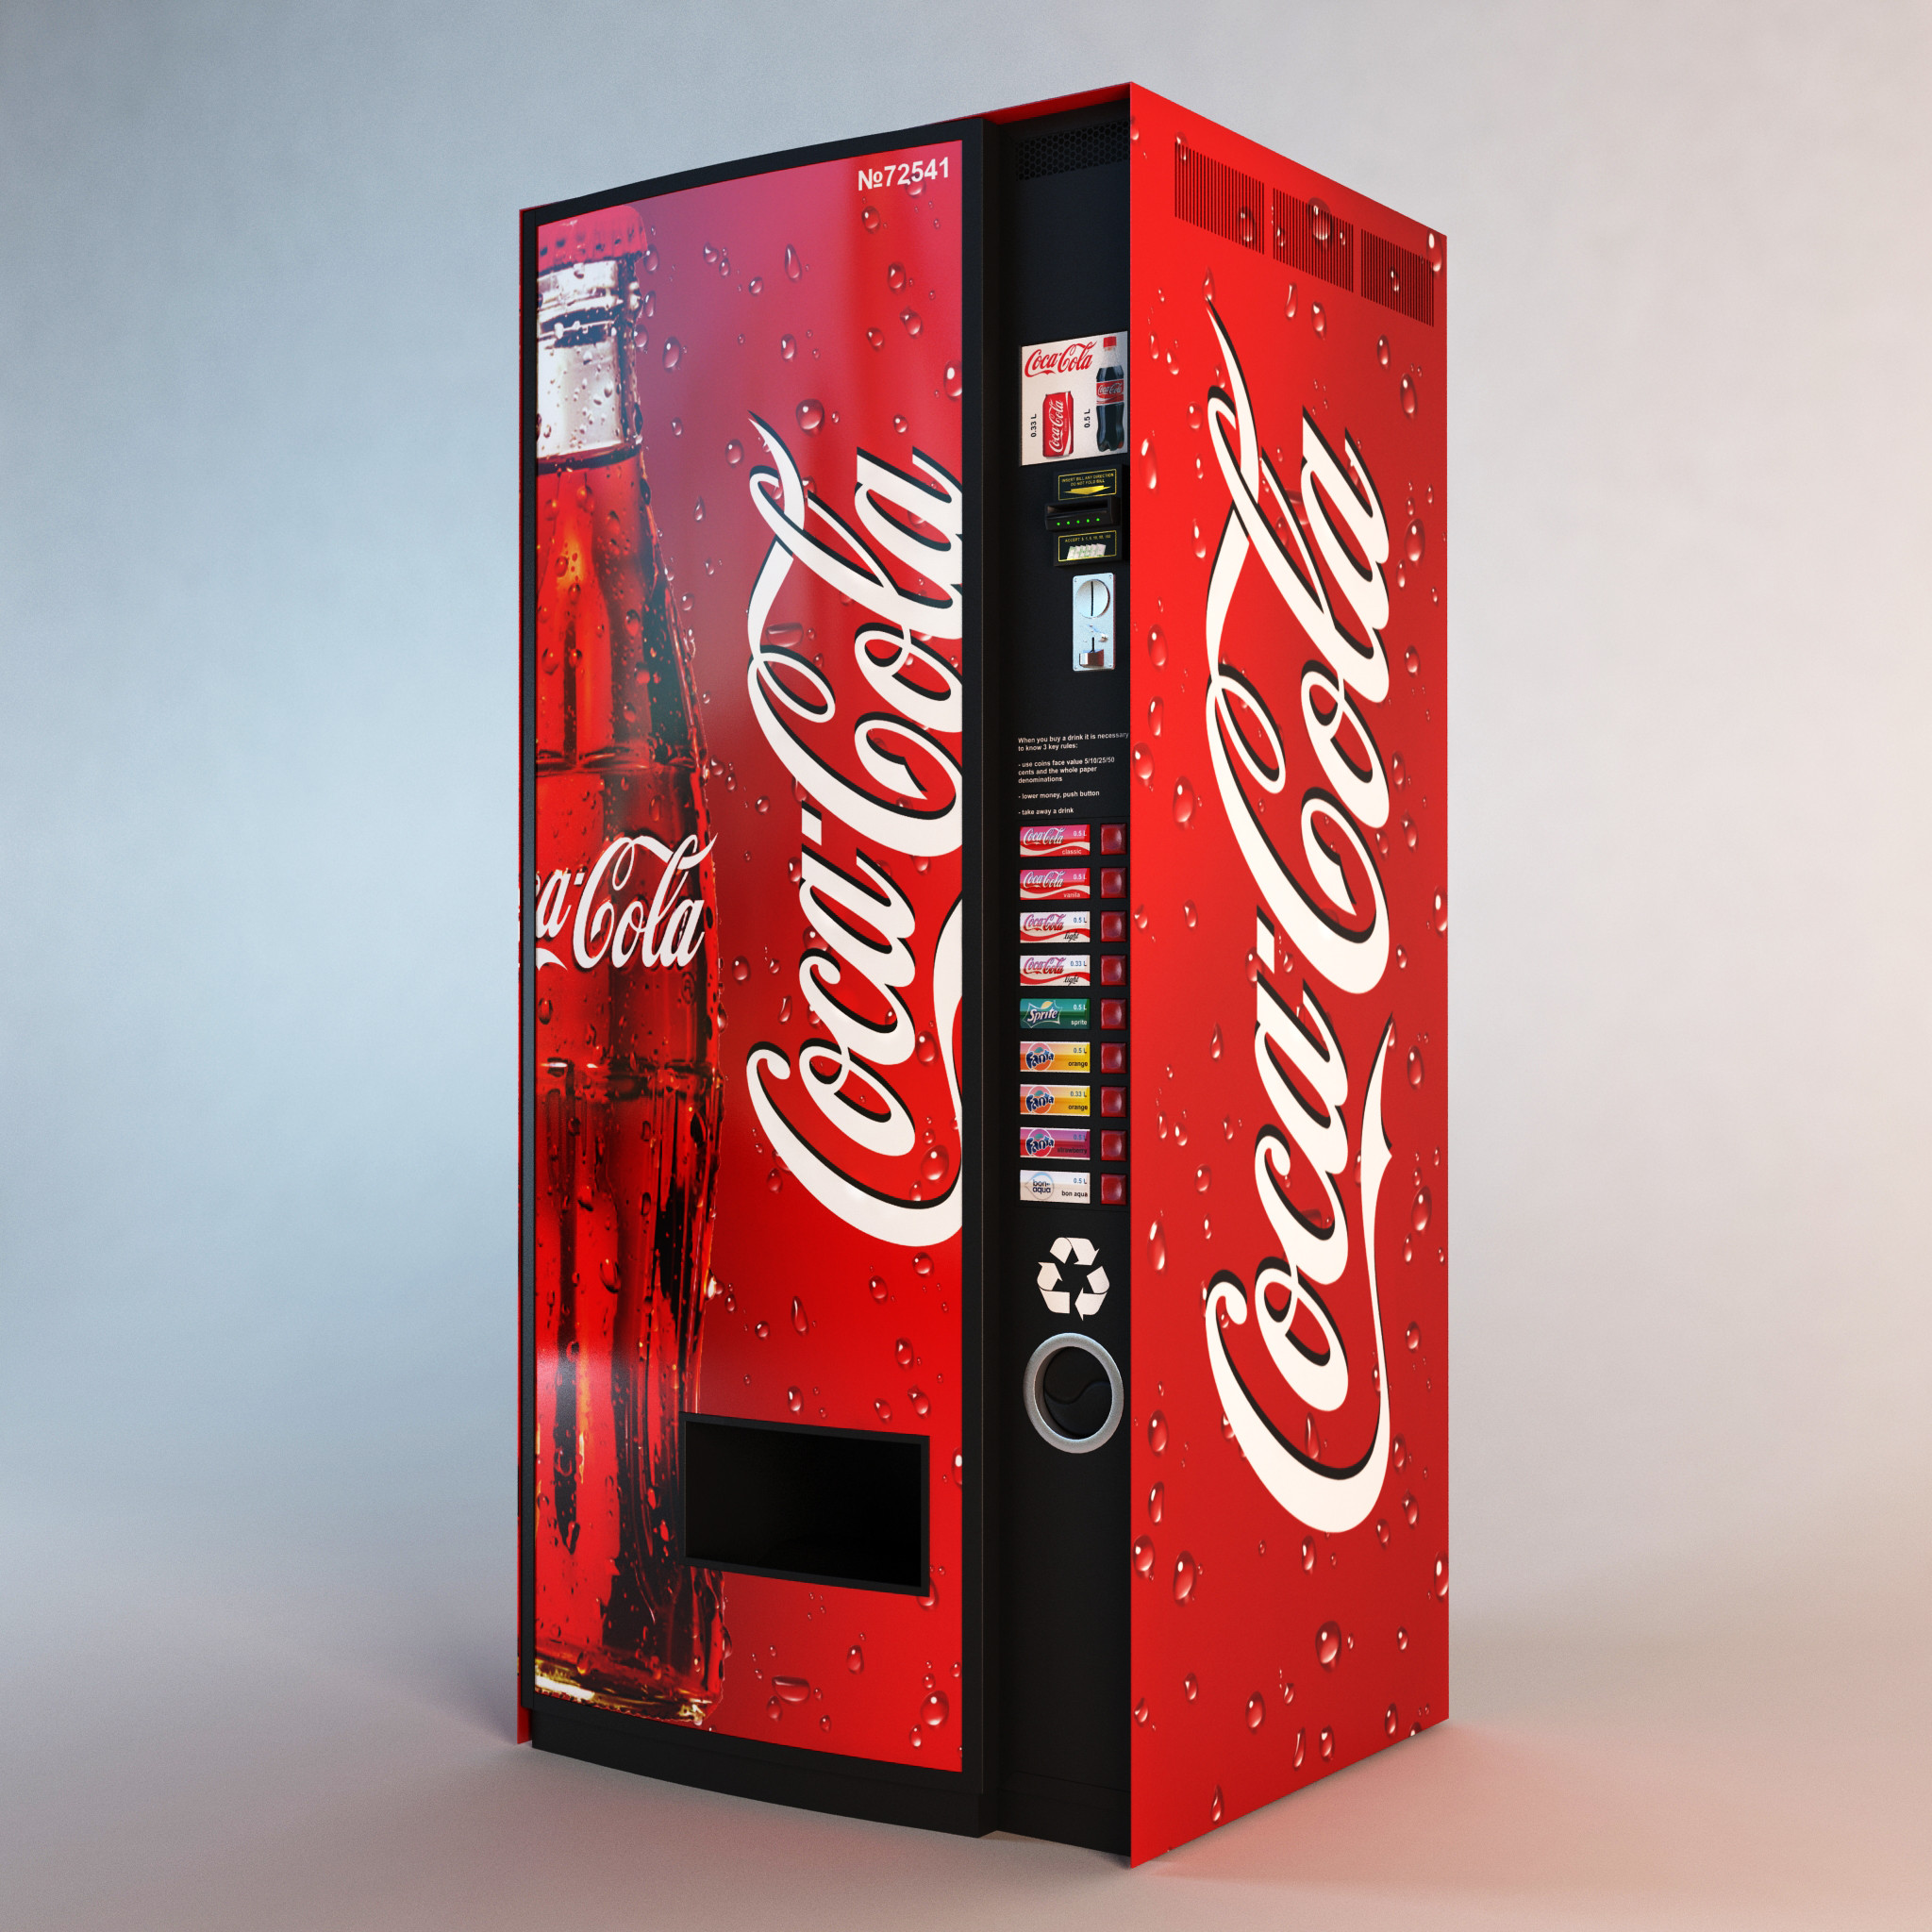 Quenching Thirst and Igniting Business Coke Vending Machines for Sale